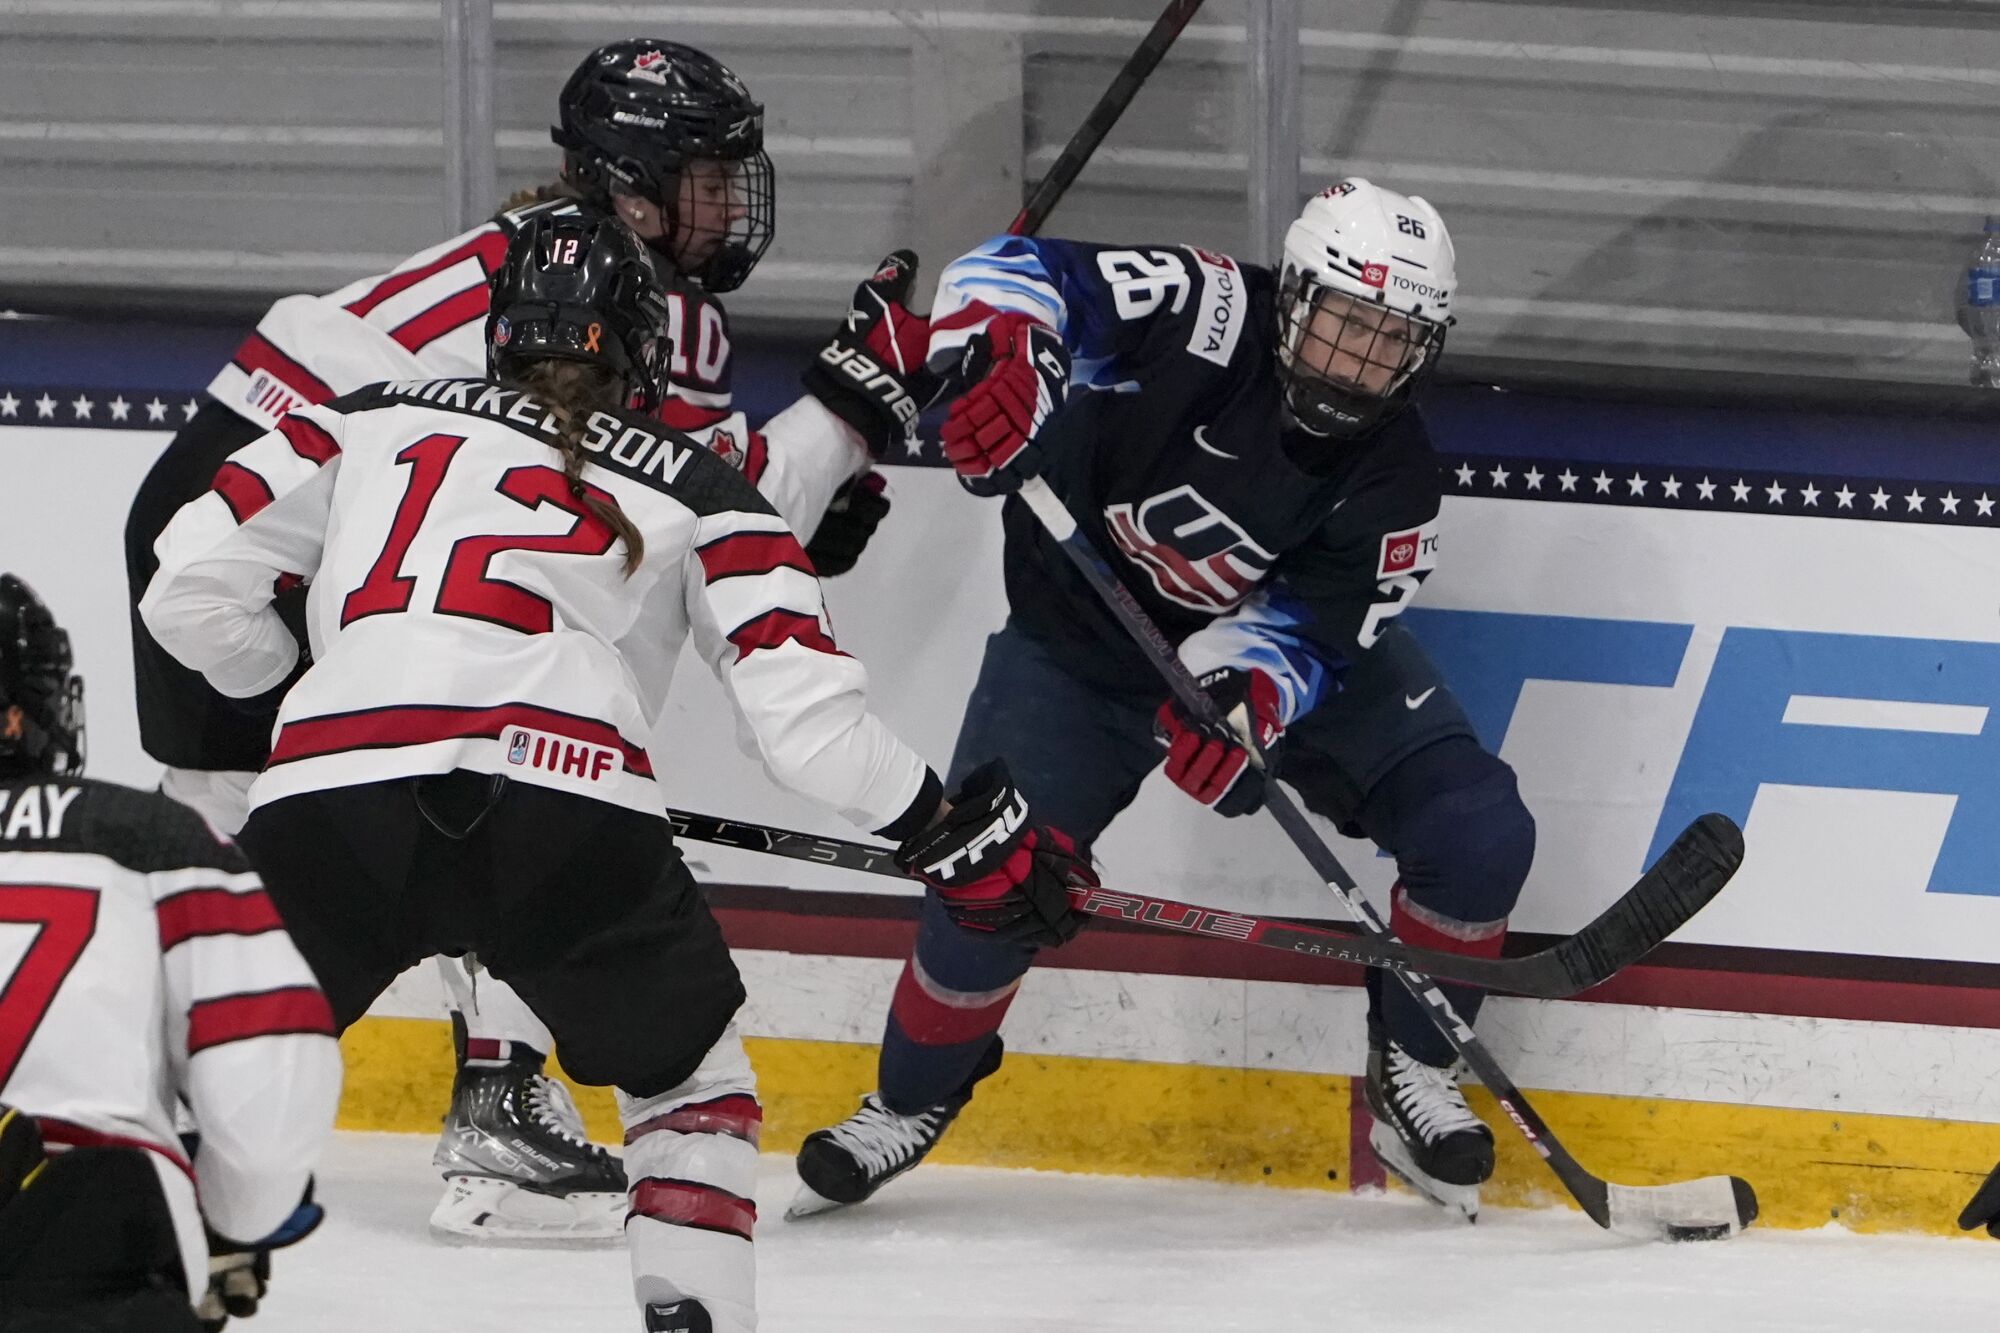 U.S. forward Kendall Coyne Schofield, right, looks to pass during an exhibition game against Canada on Dec. 15.